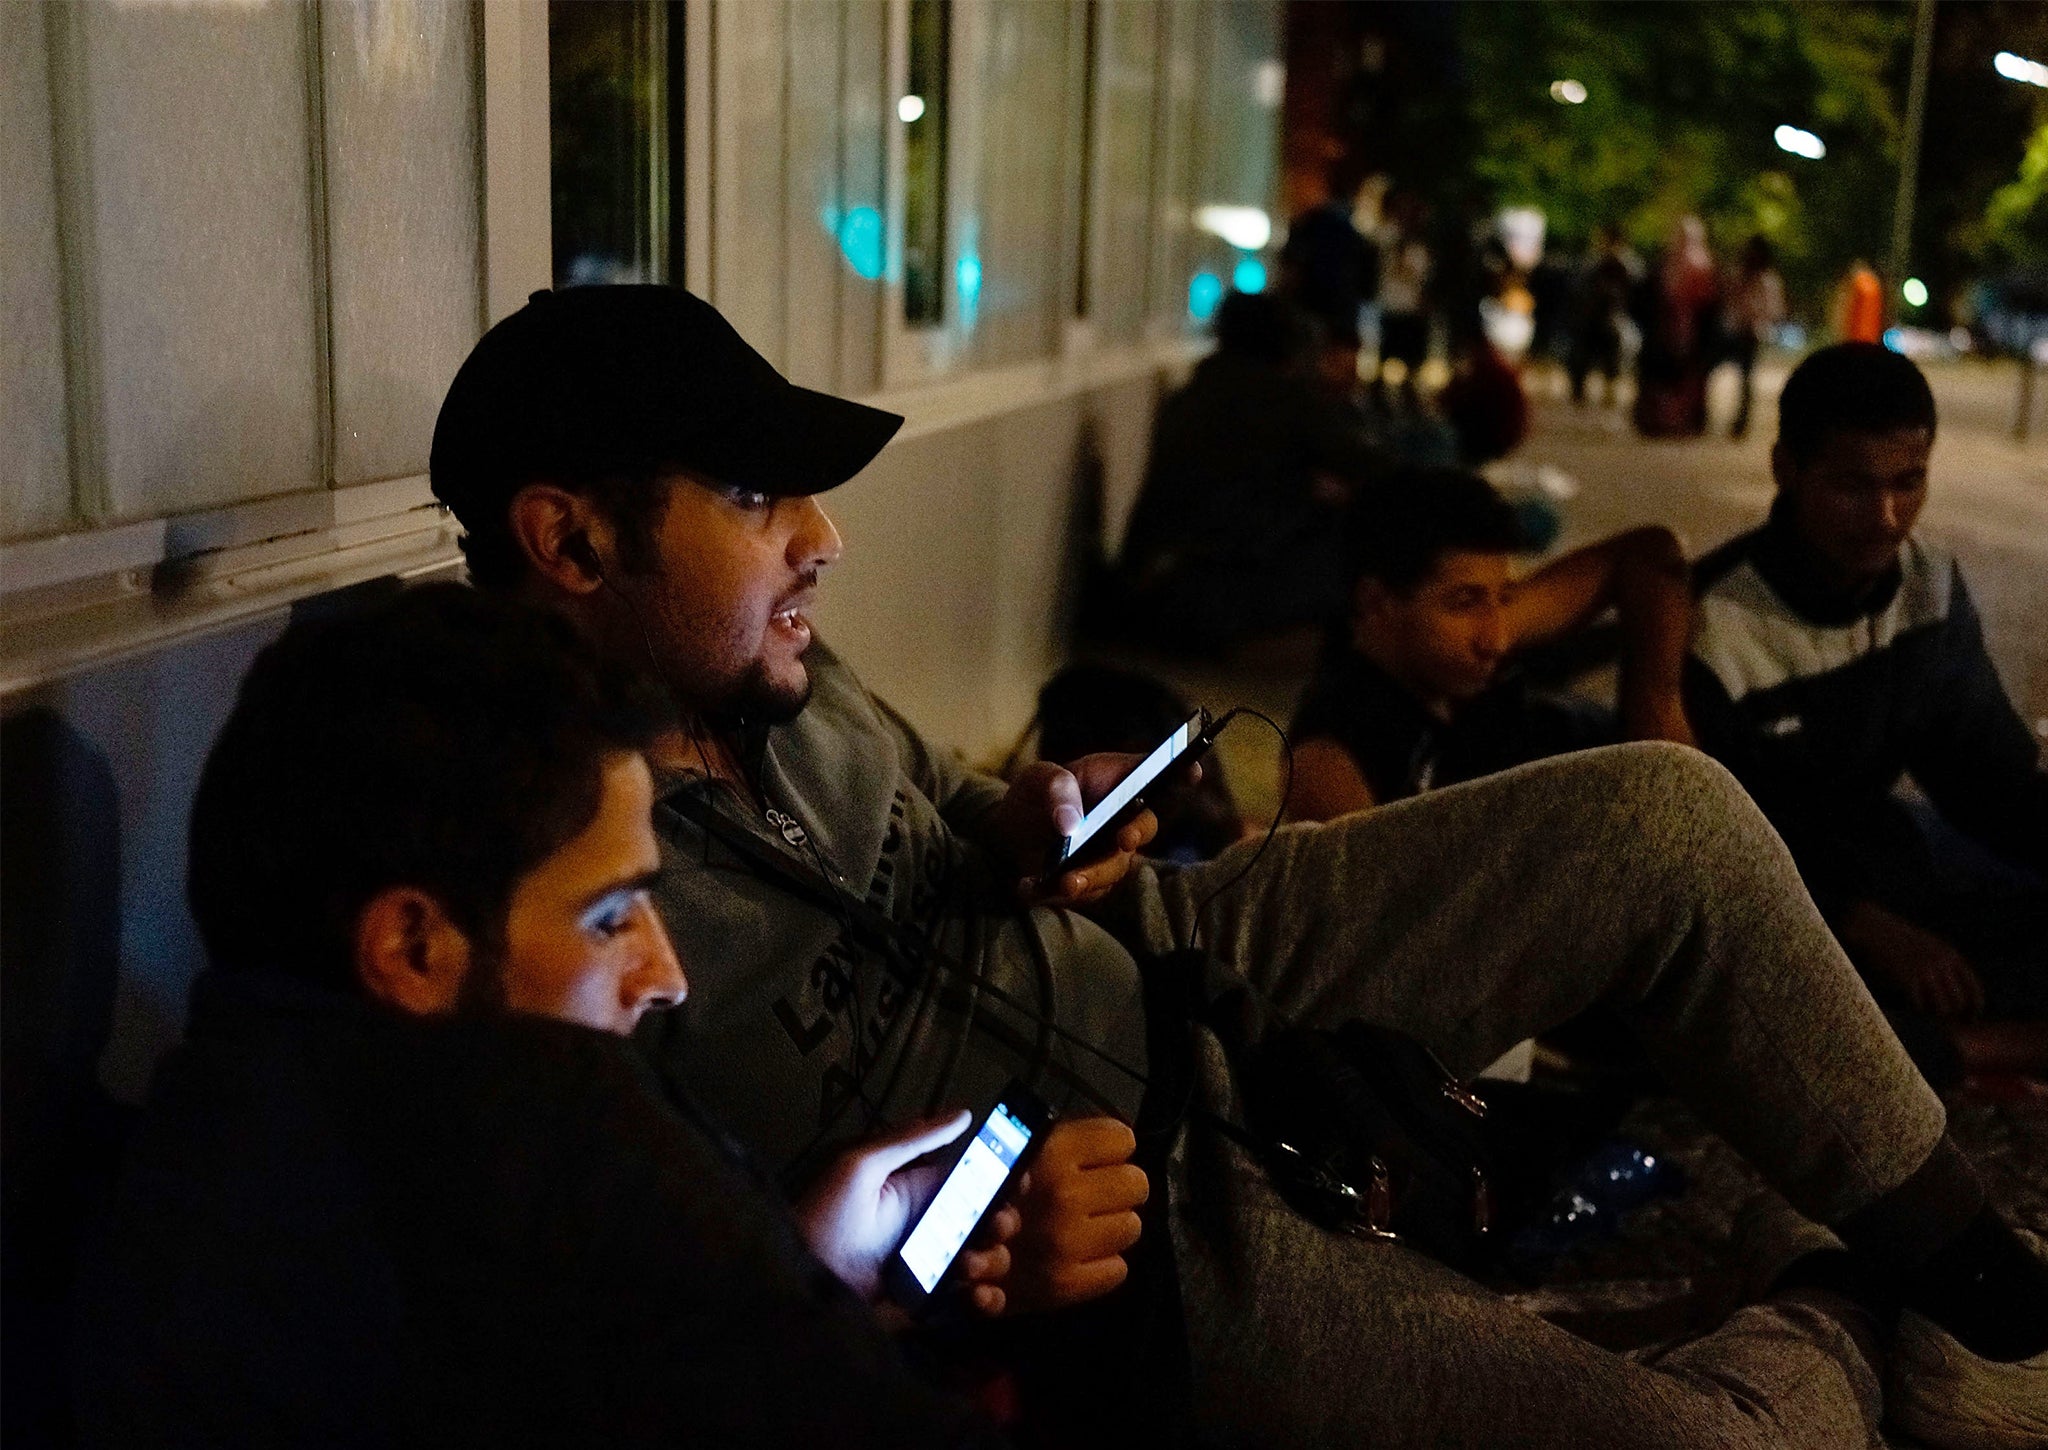 Two refugees from Syria chat on their smartphones with their relatives in Syria as they wait in front of the the Central Registration Office for Asylum Seekers in Berlin, Germany